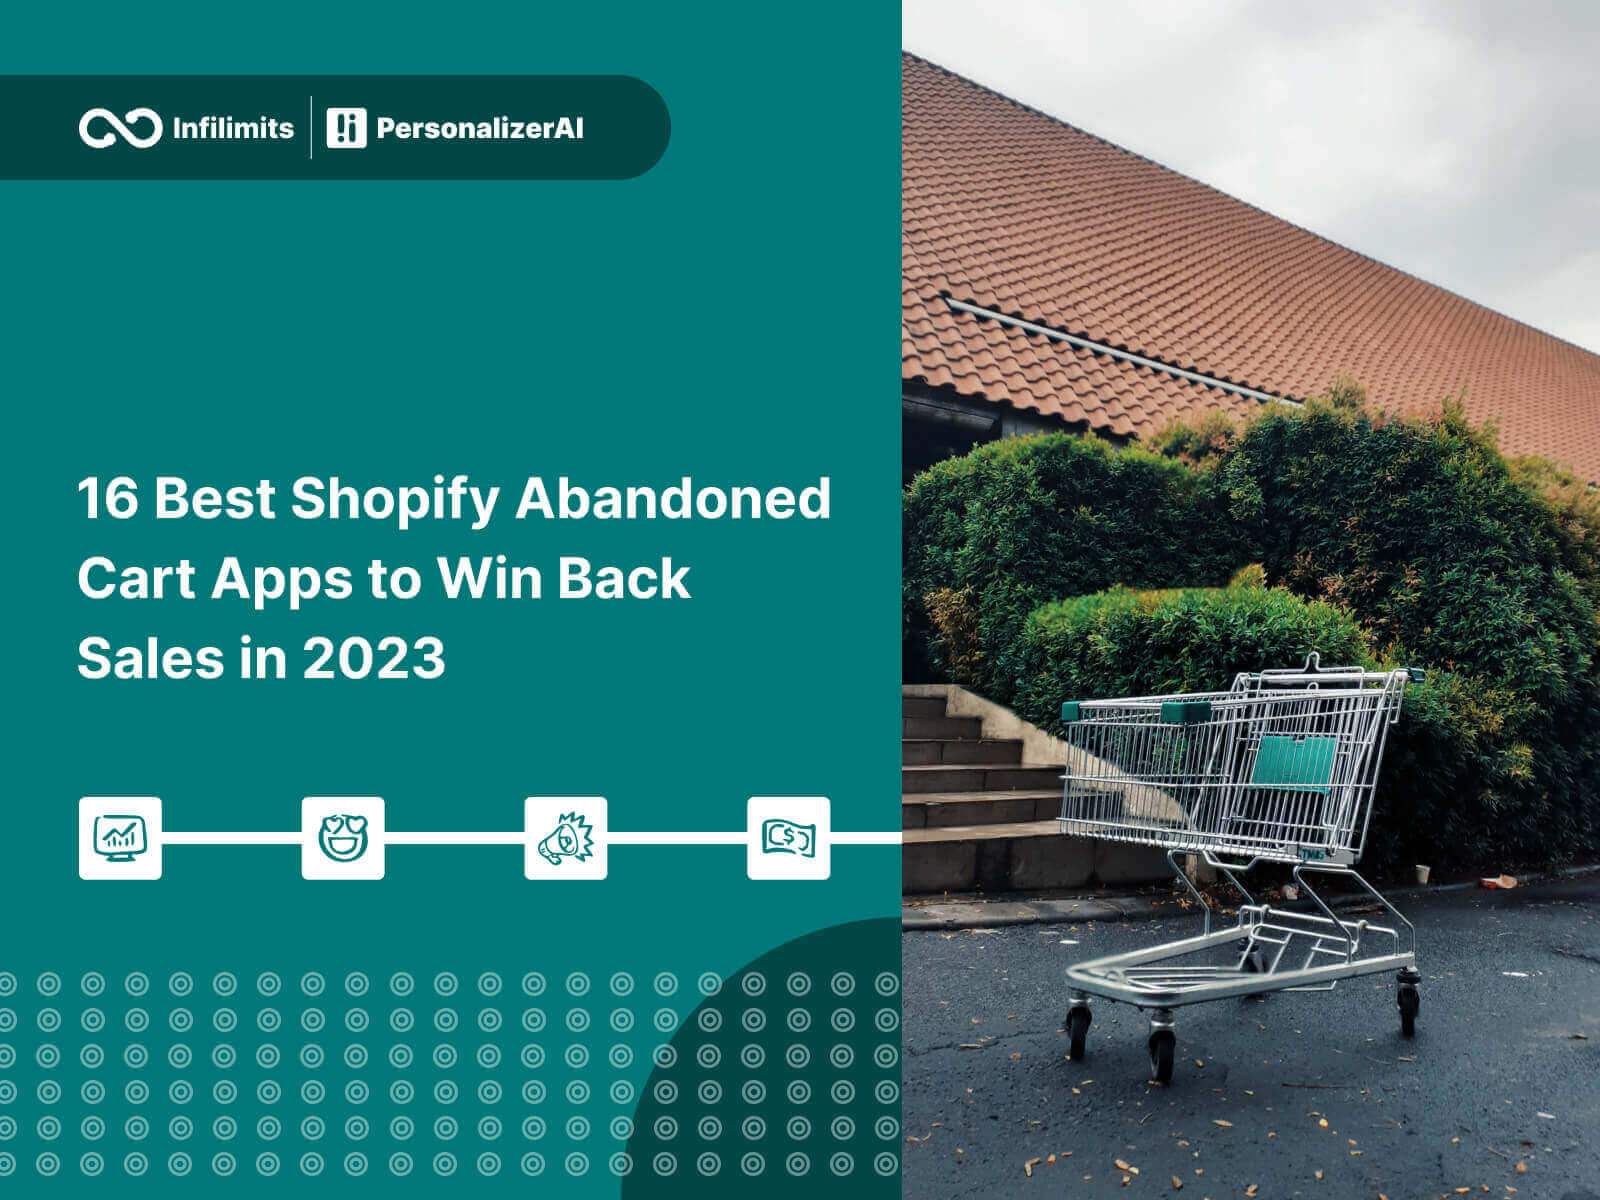 Green background with text "16 best shopify abandoned cart apps to win back sales"